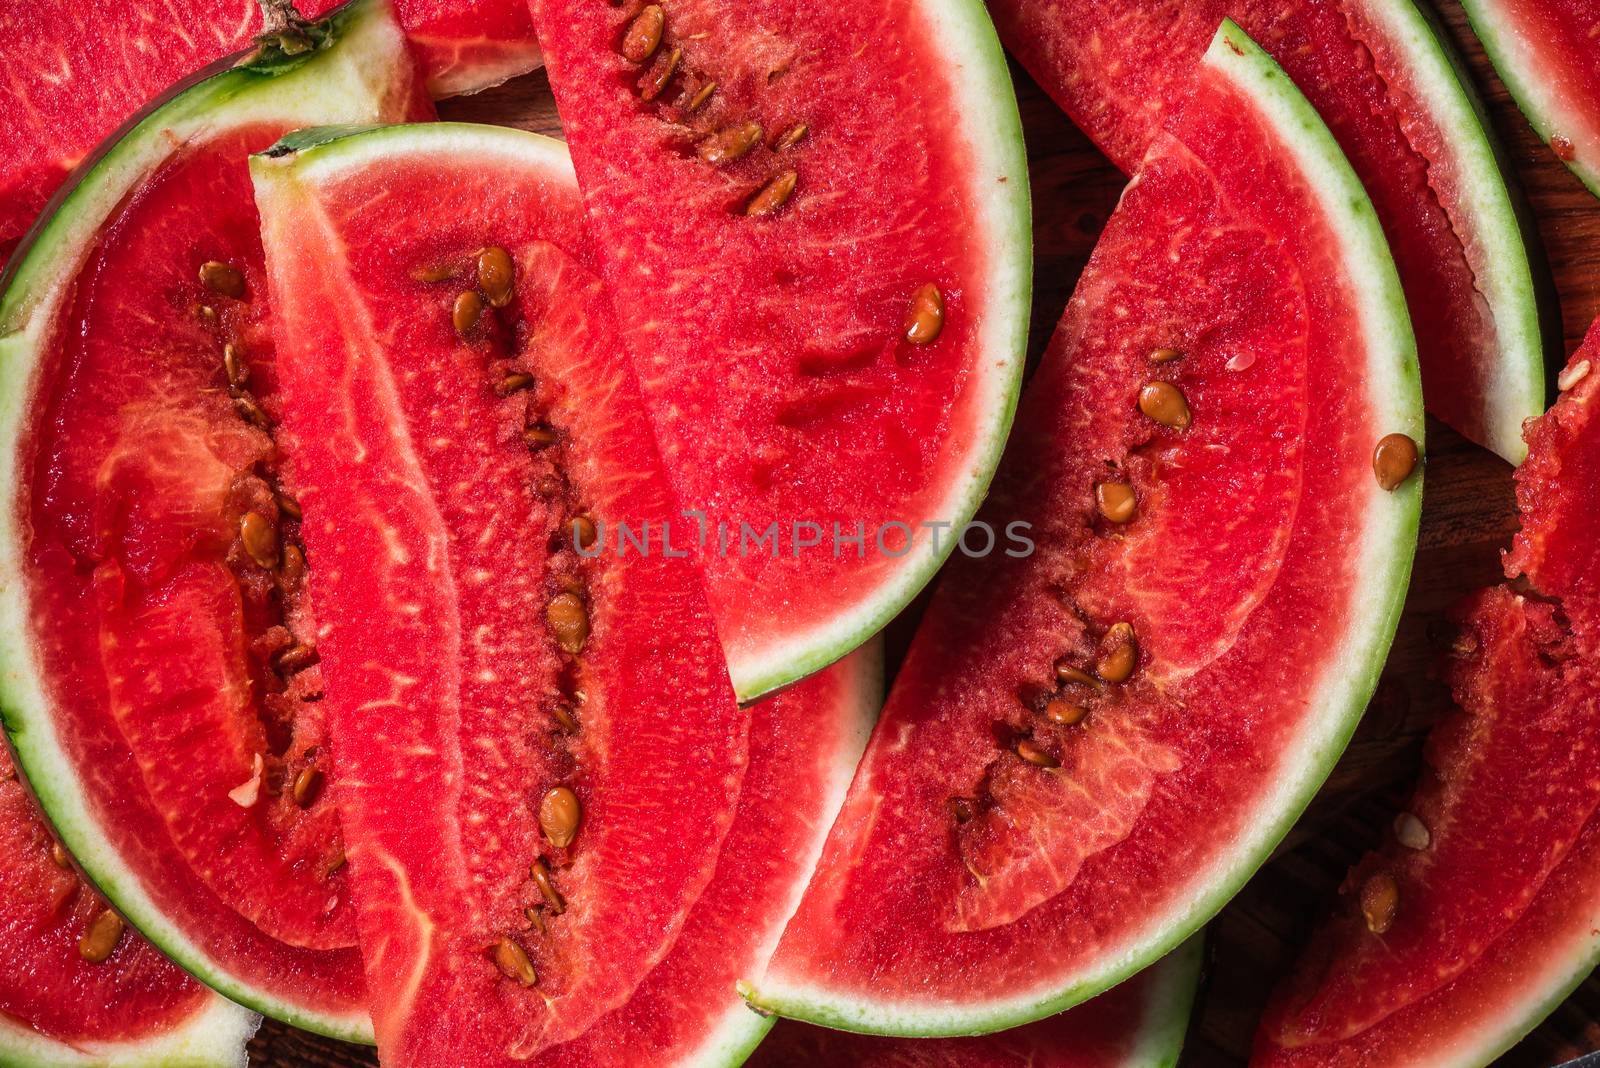 Watermelon slices lying on wooden surface. Background